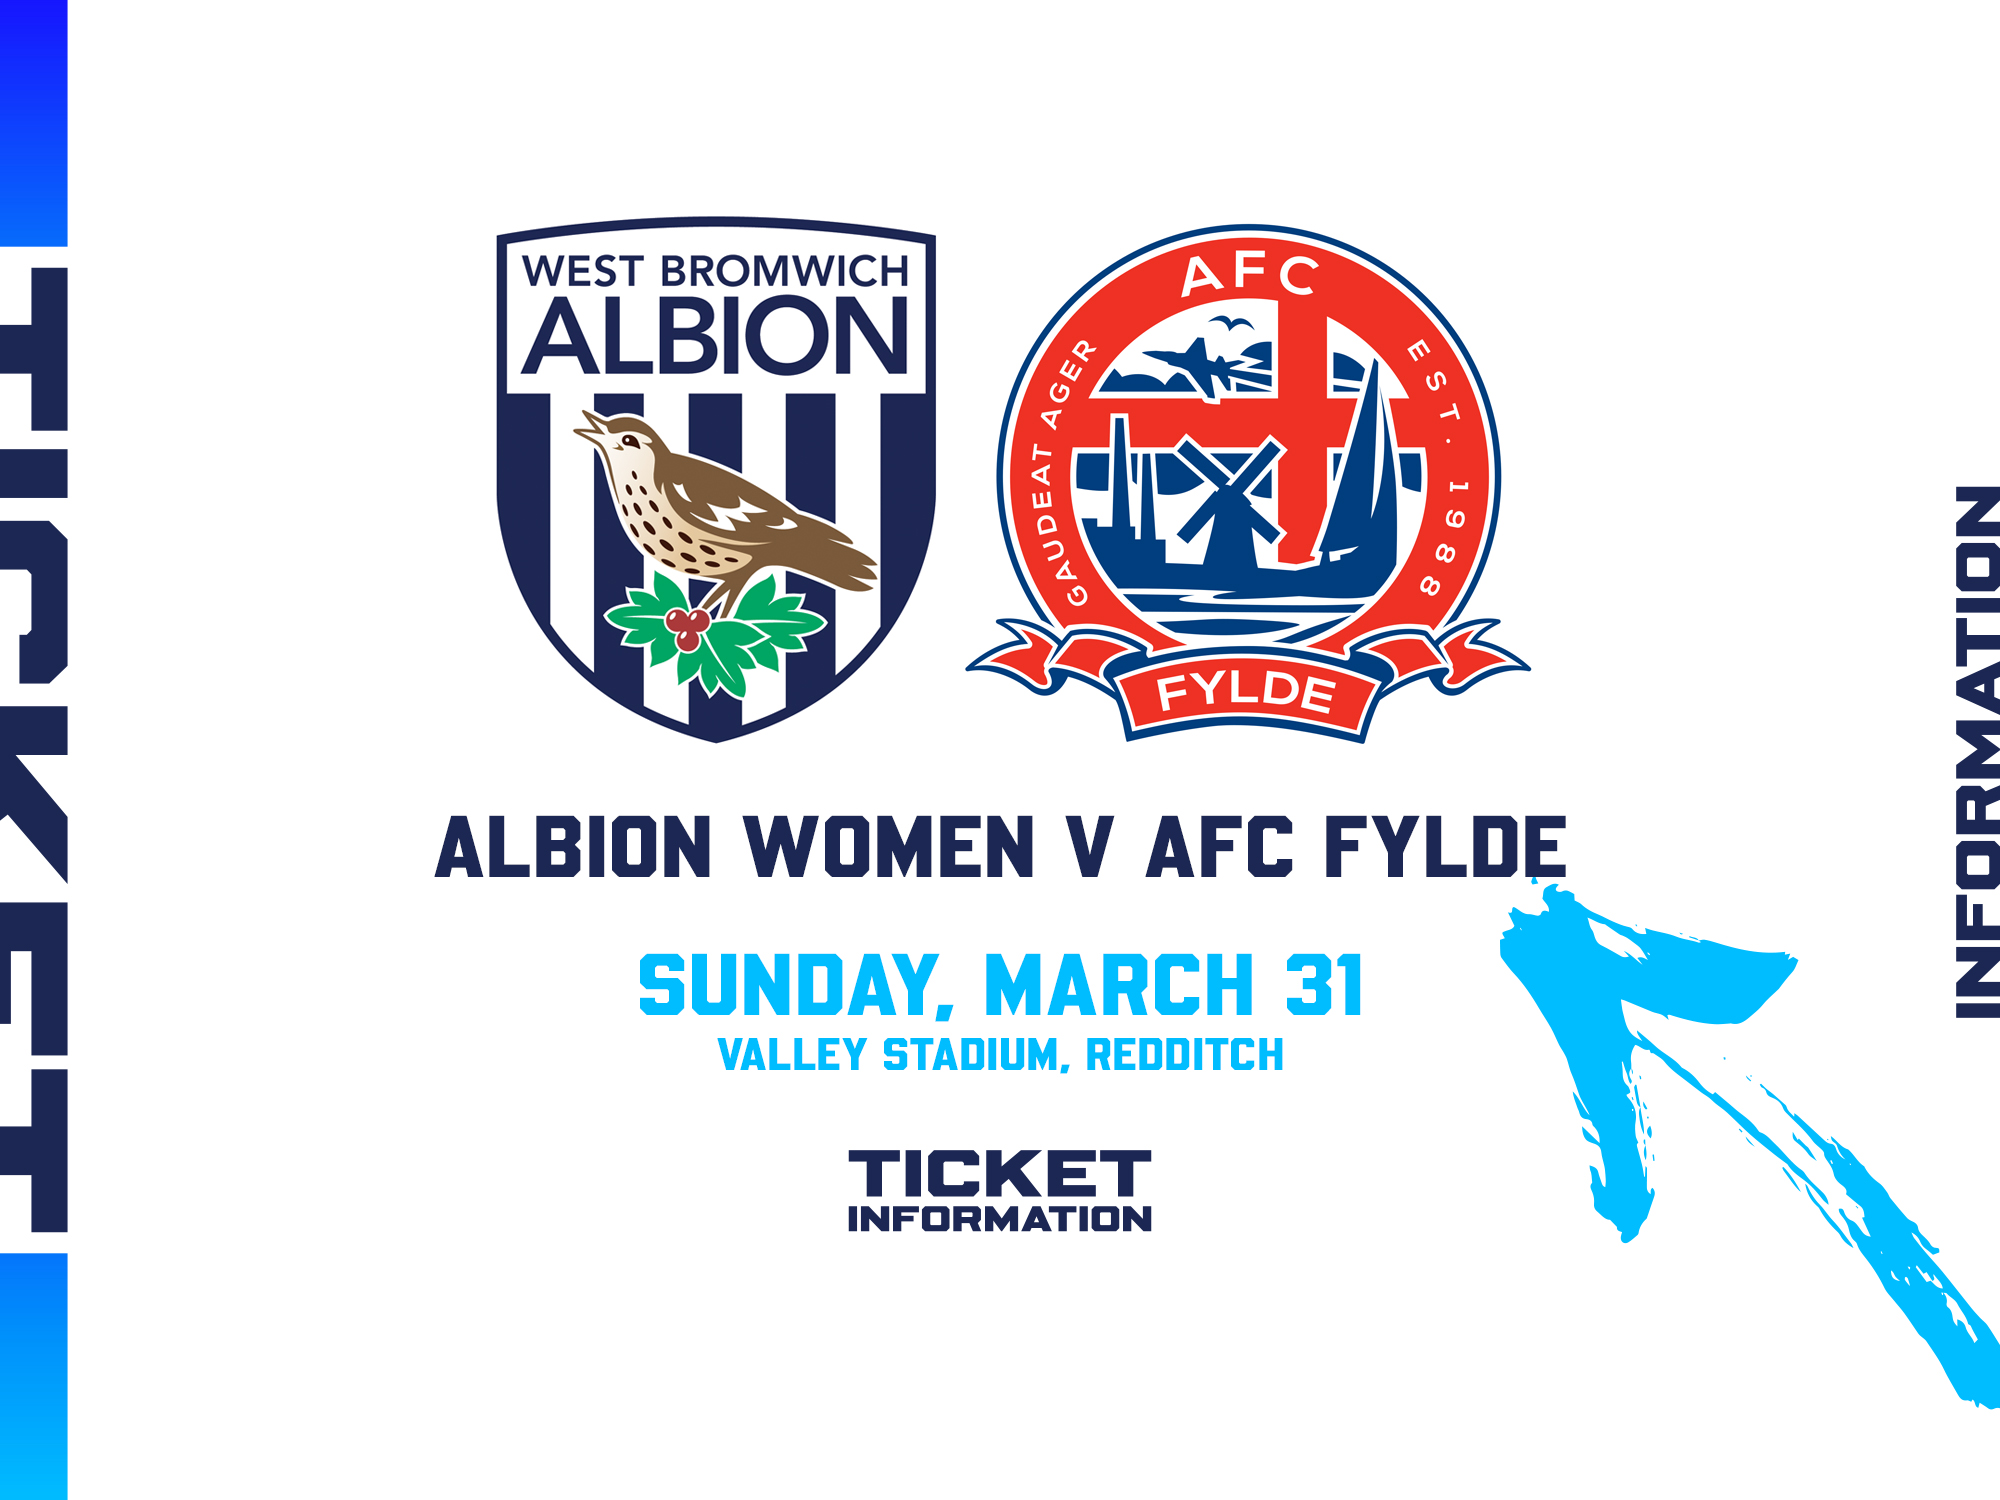 A ticket graphic displaying information for Albion Women's game against AFC Fylde